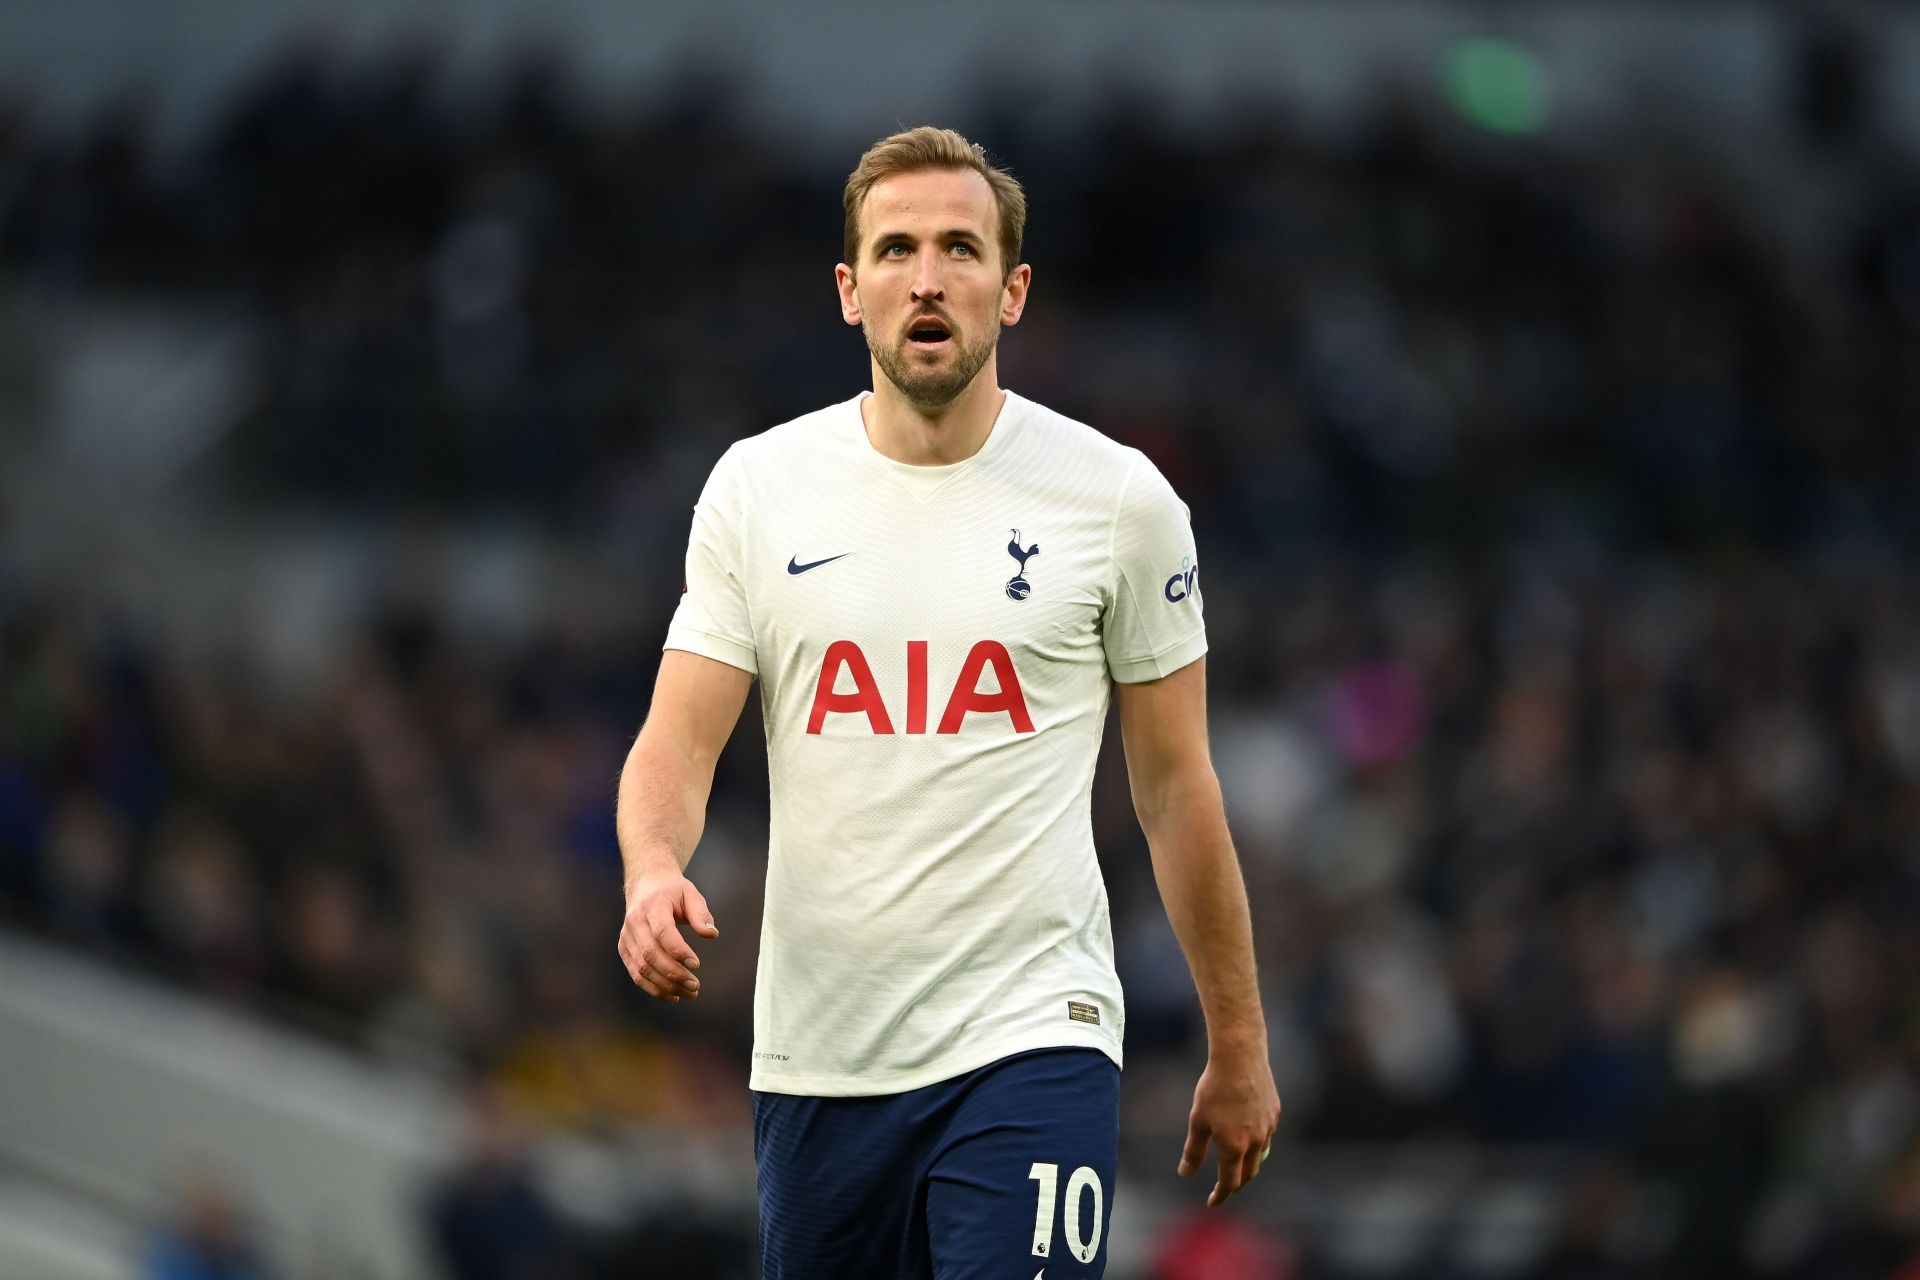 Kane denied the City move and remained with Spurs